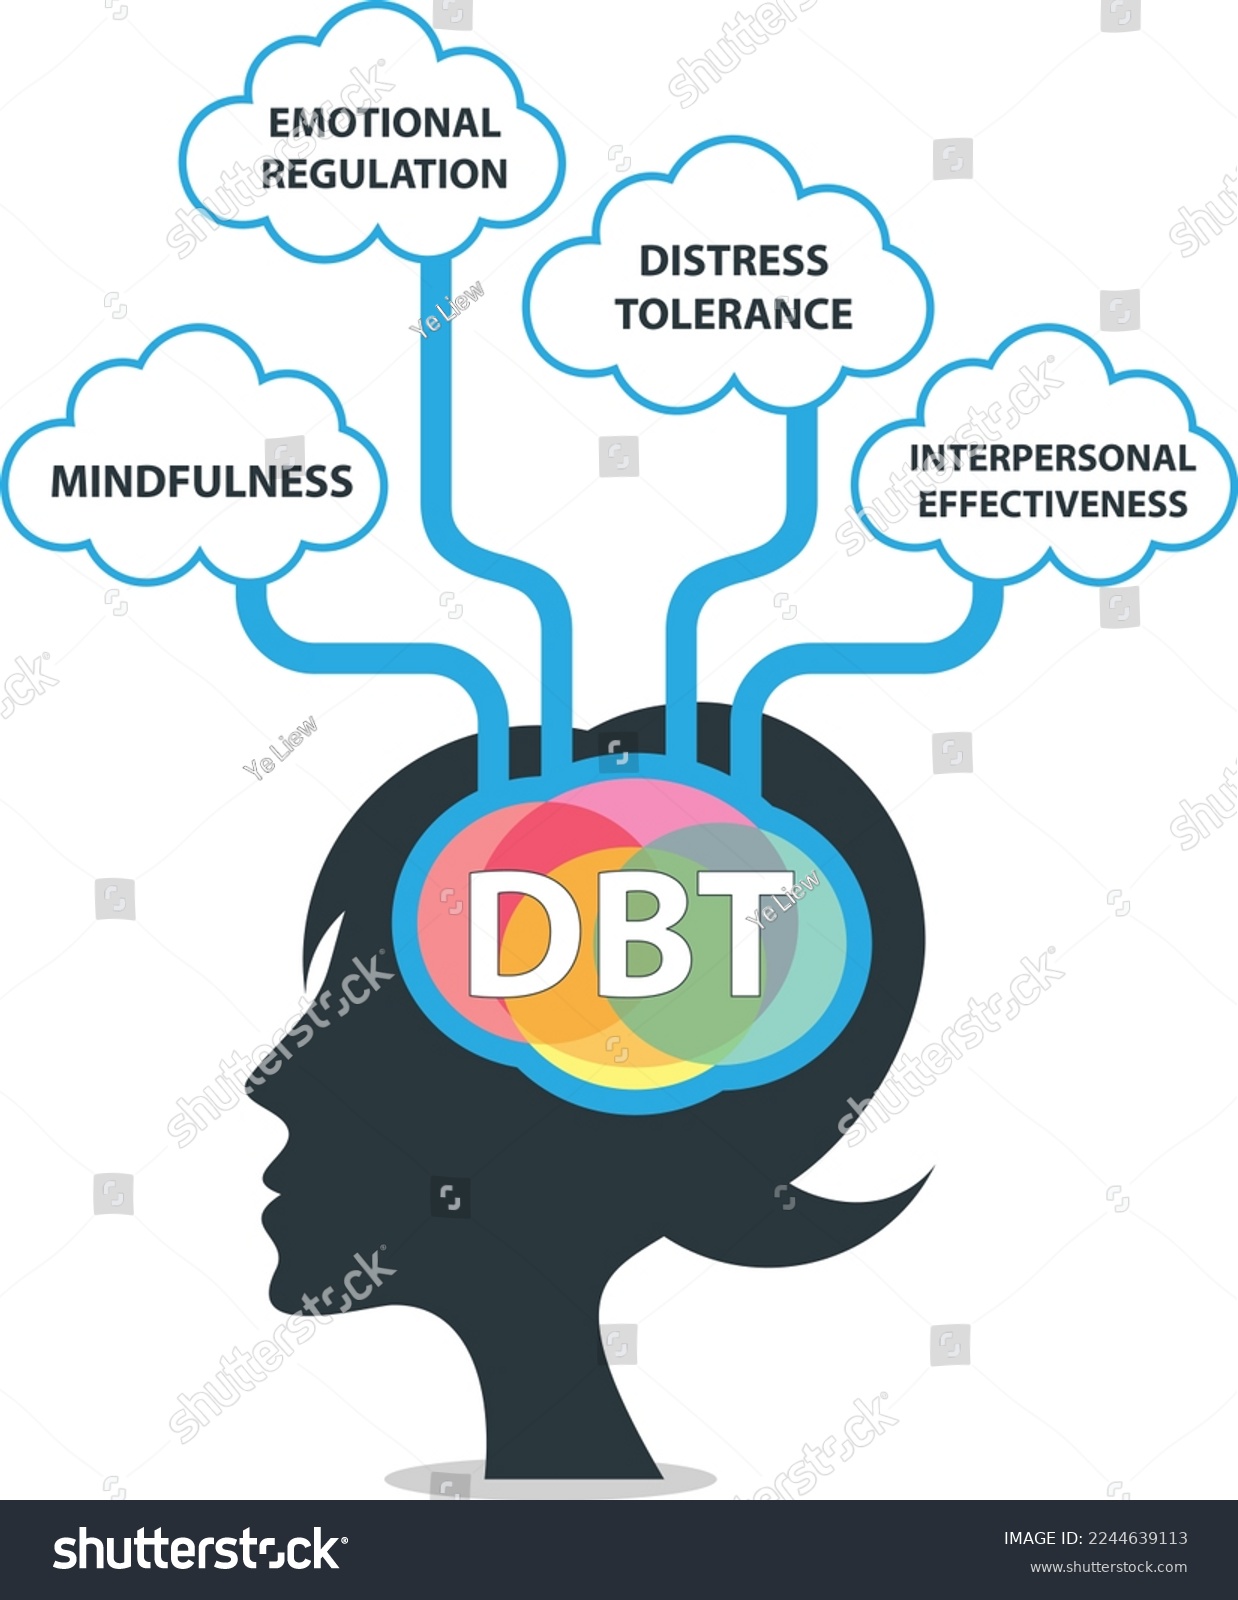 SVG of Dialectical Behavioral Therapy (DBT) concept. It is a type of Cognitive Behavioral Therapy (CBT) that teaches people to be in the moment and stress regulation. svg